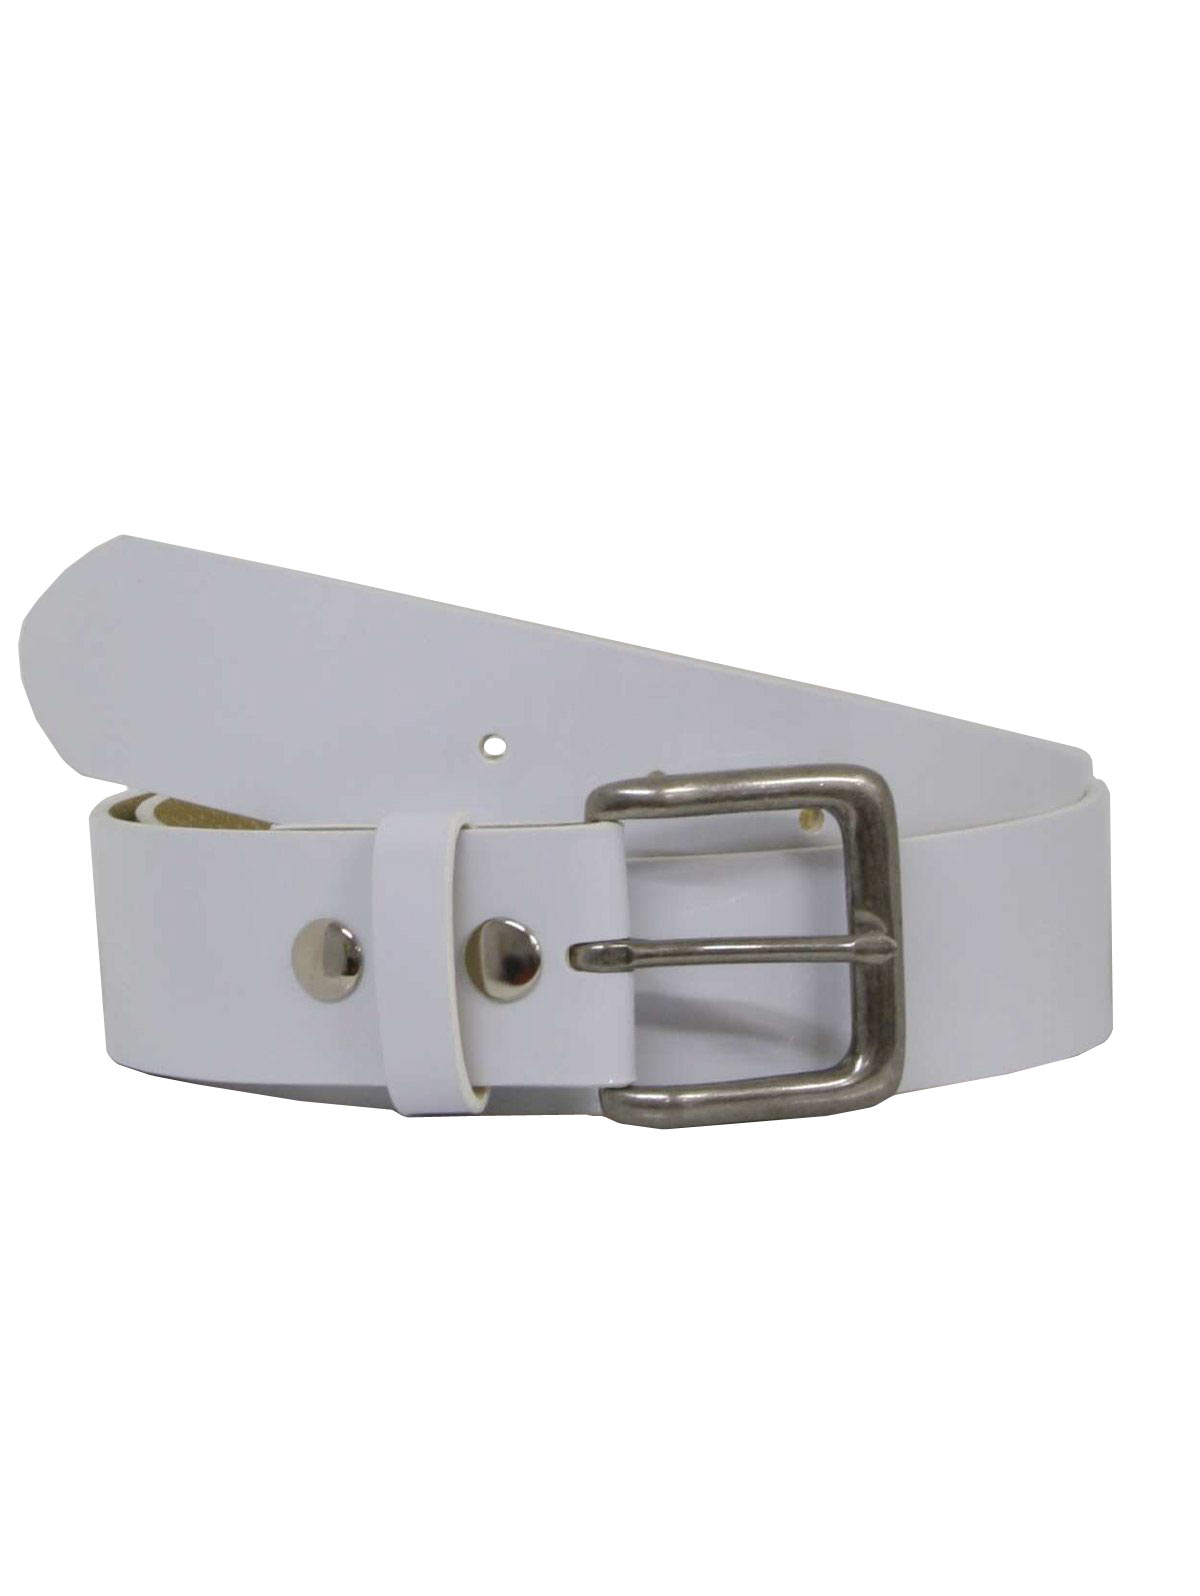 Retro 70s Belt (Genuine Leather) : 70s style (made new recently ...